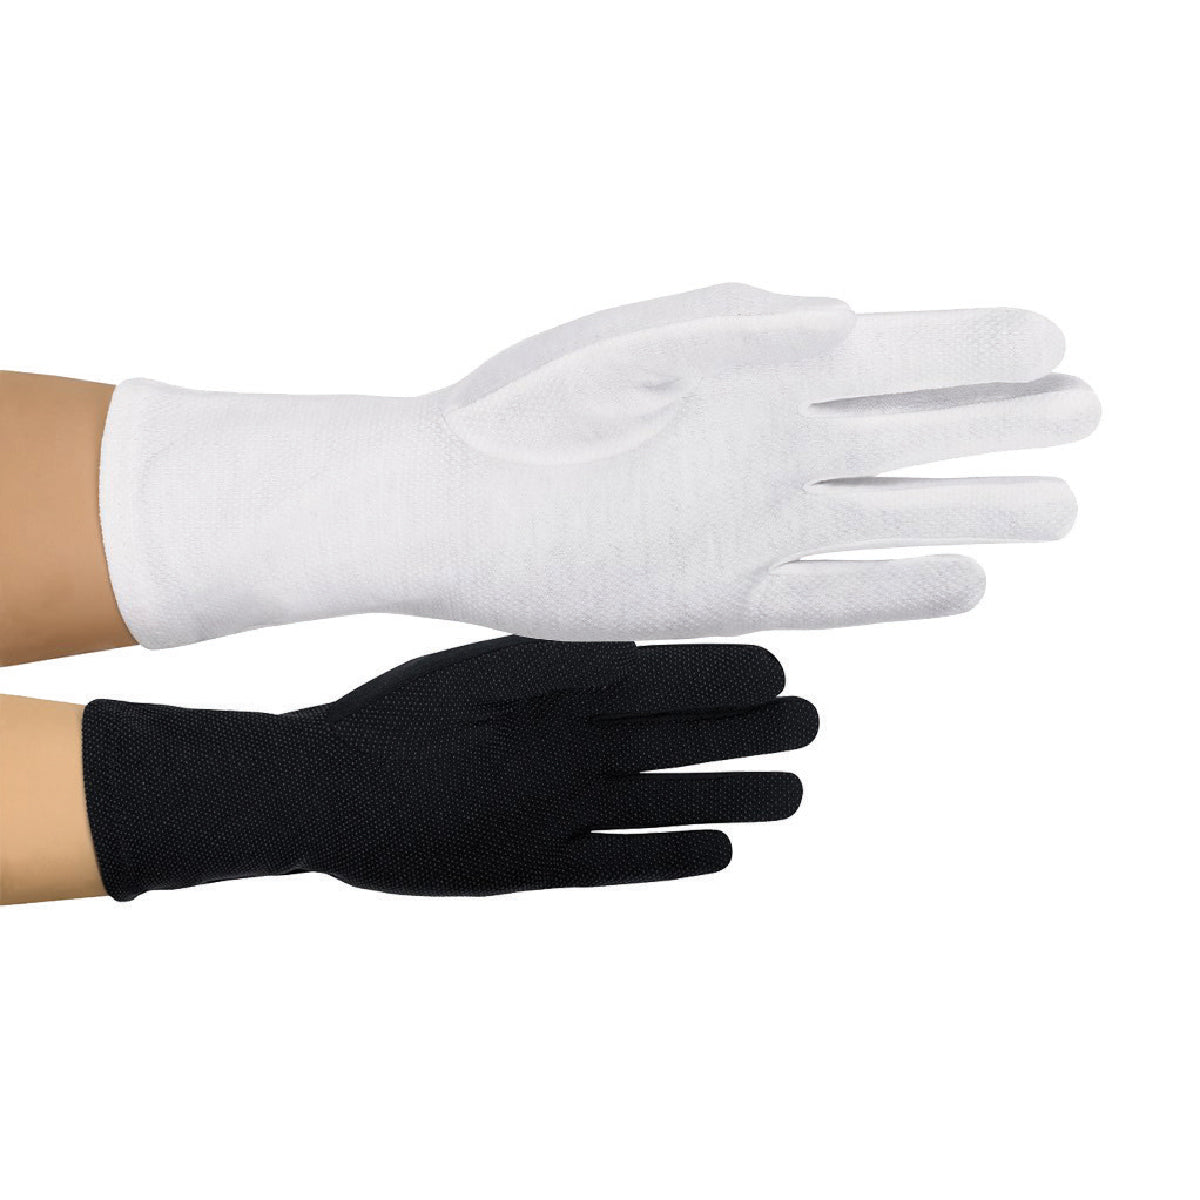 Marching Band Gloves